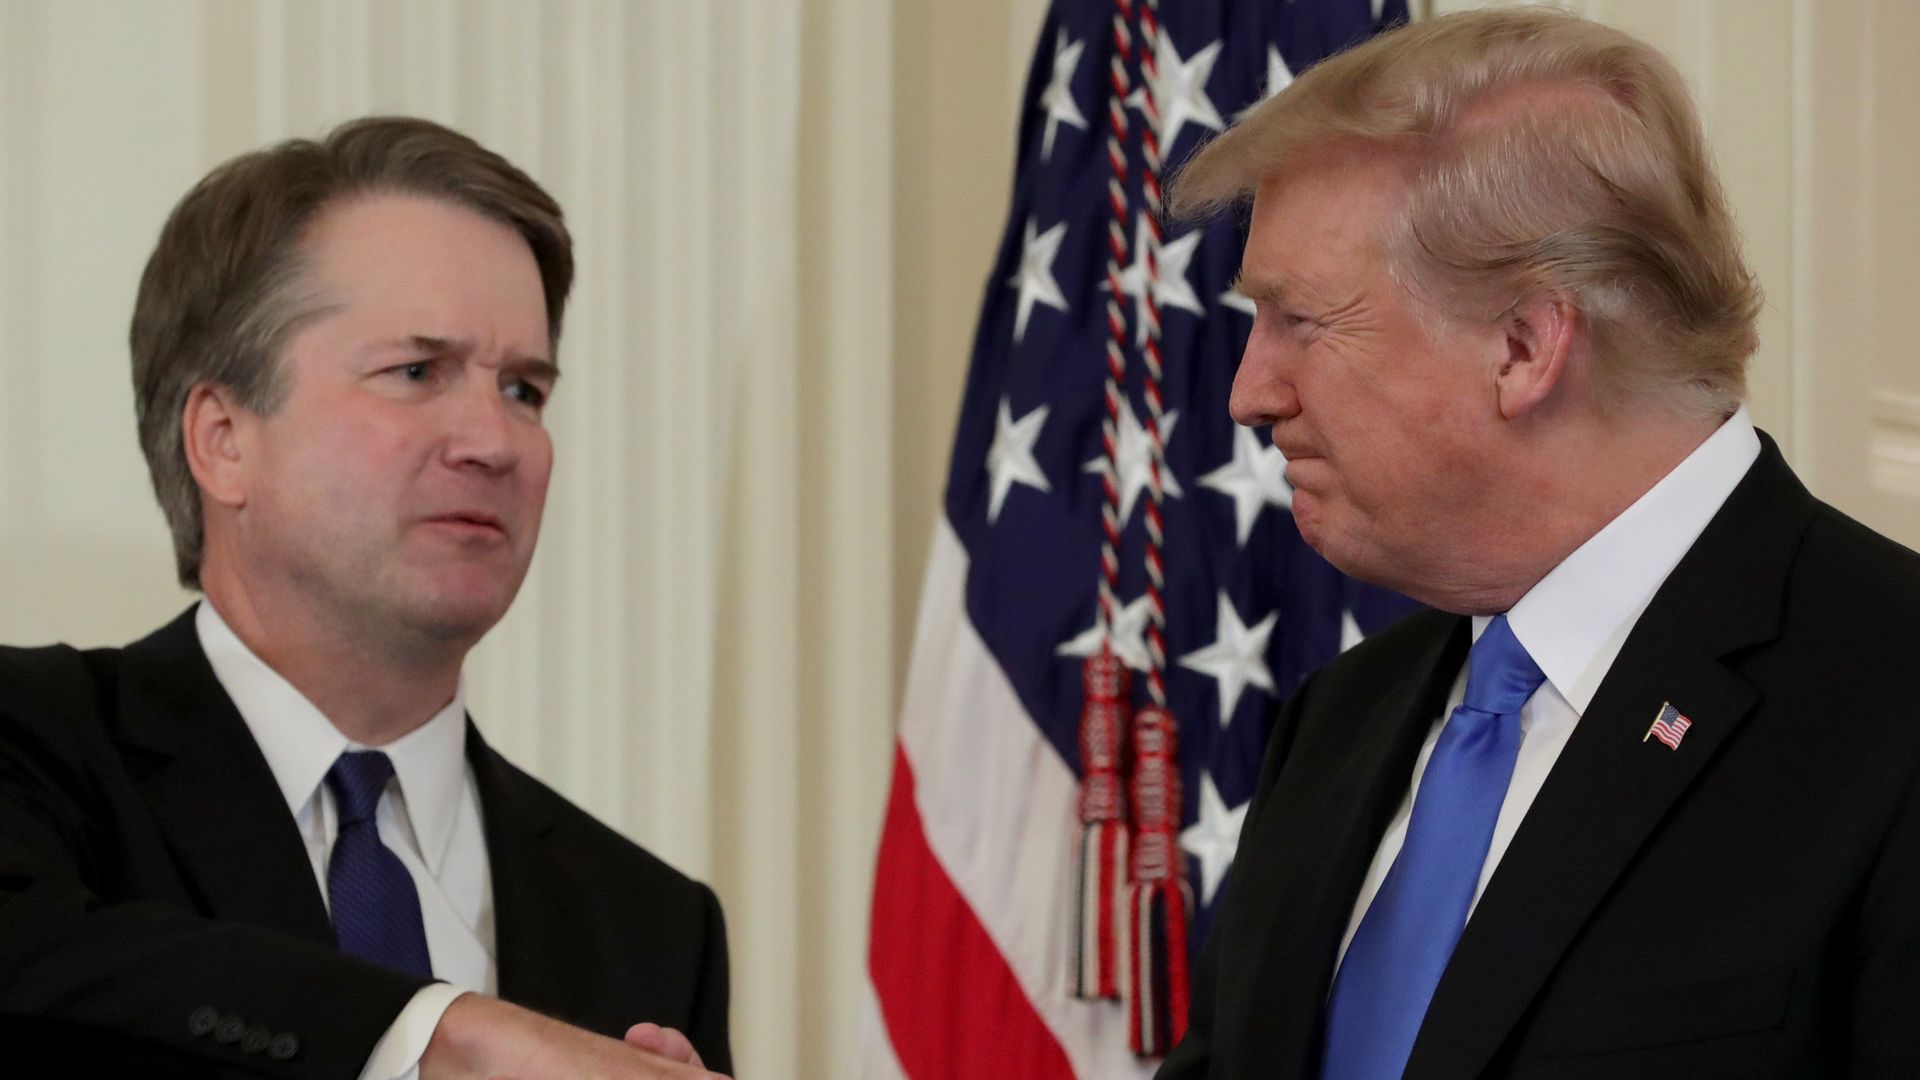 Trump shaking hands with Kavanaugh